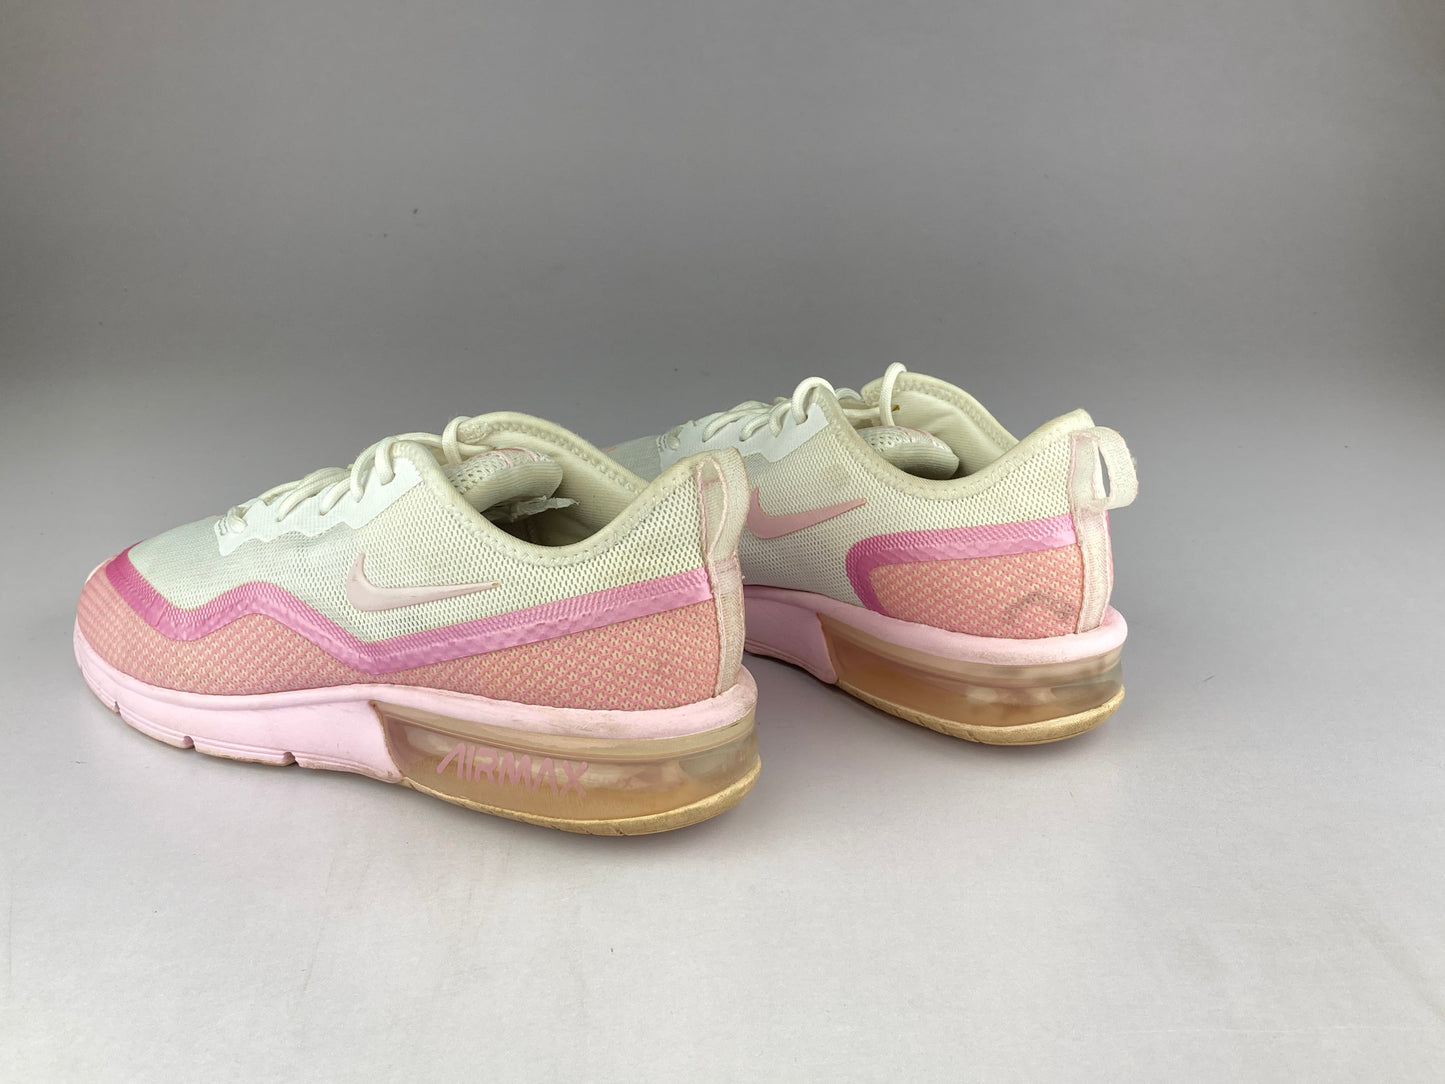 Nike WMNS AIRMAX SEQUENT4.5PRM 'White Pink' bq8825-100-Sneakers-Athletic Corner